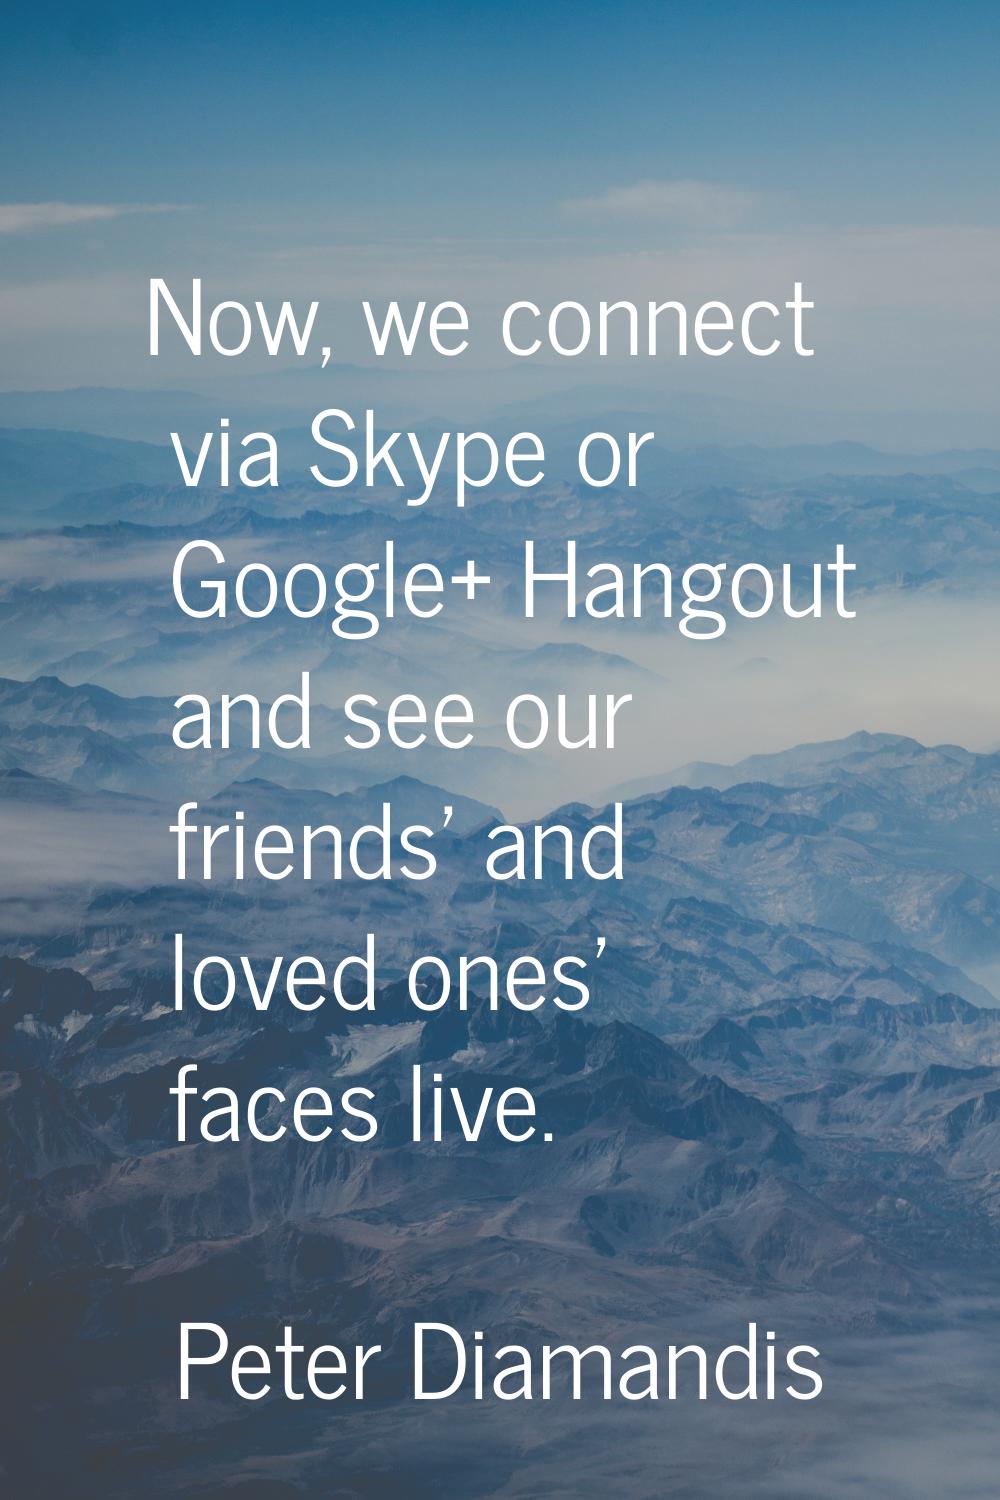 Now, we connect via Skype or Google+ Hangout and see our friends' and loved ones' faces live.